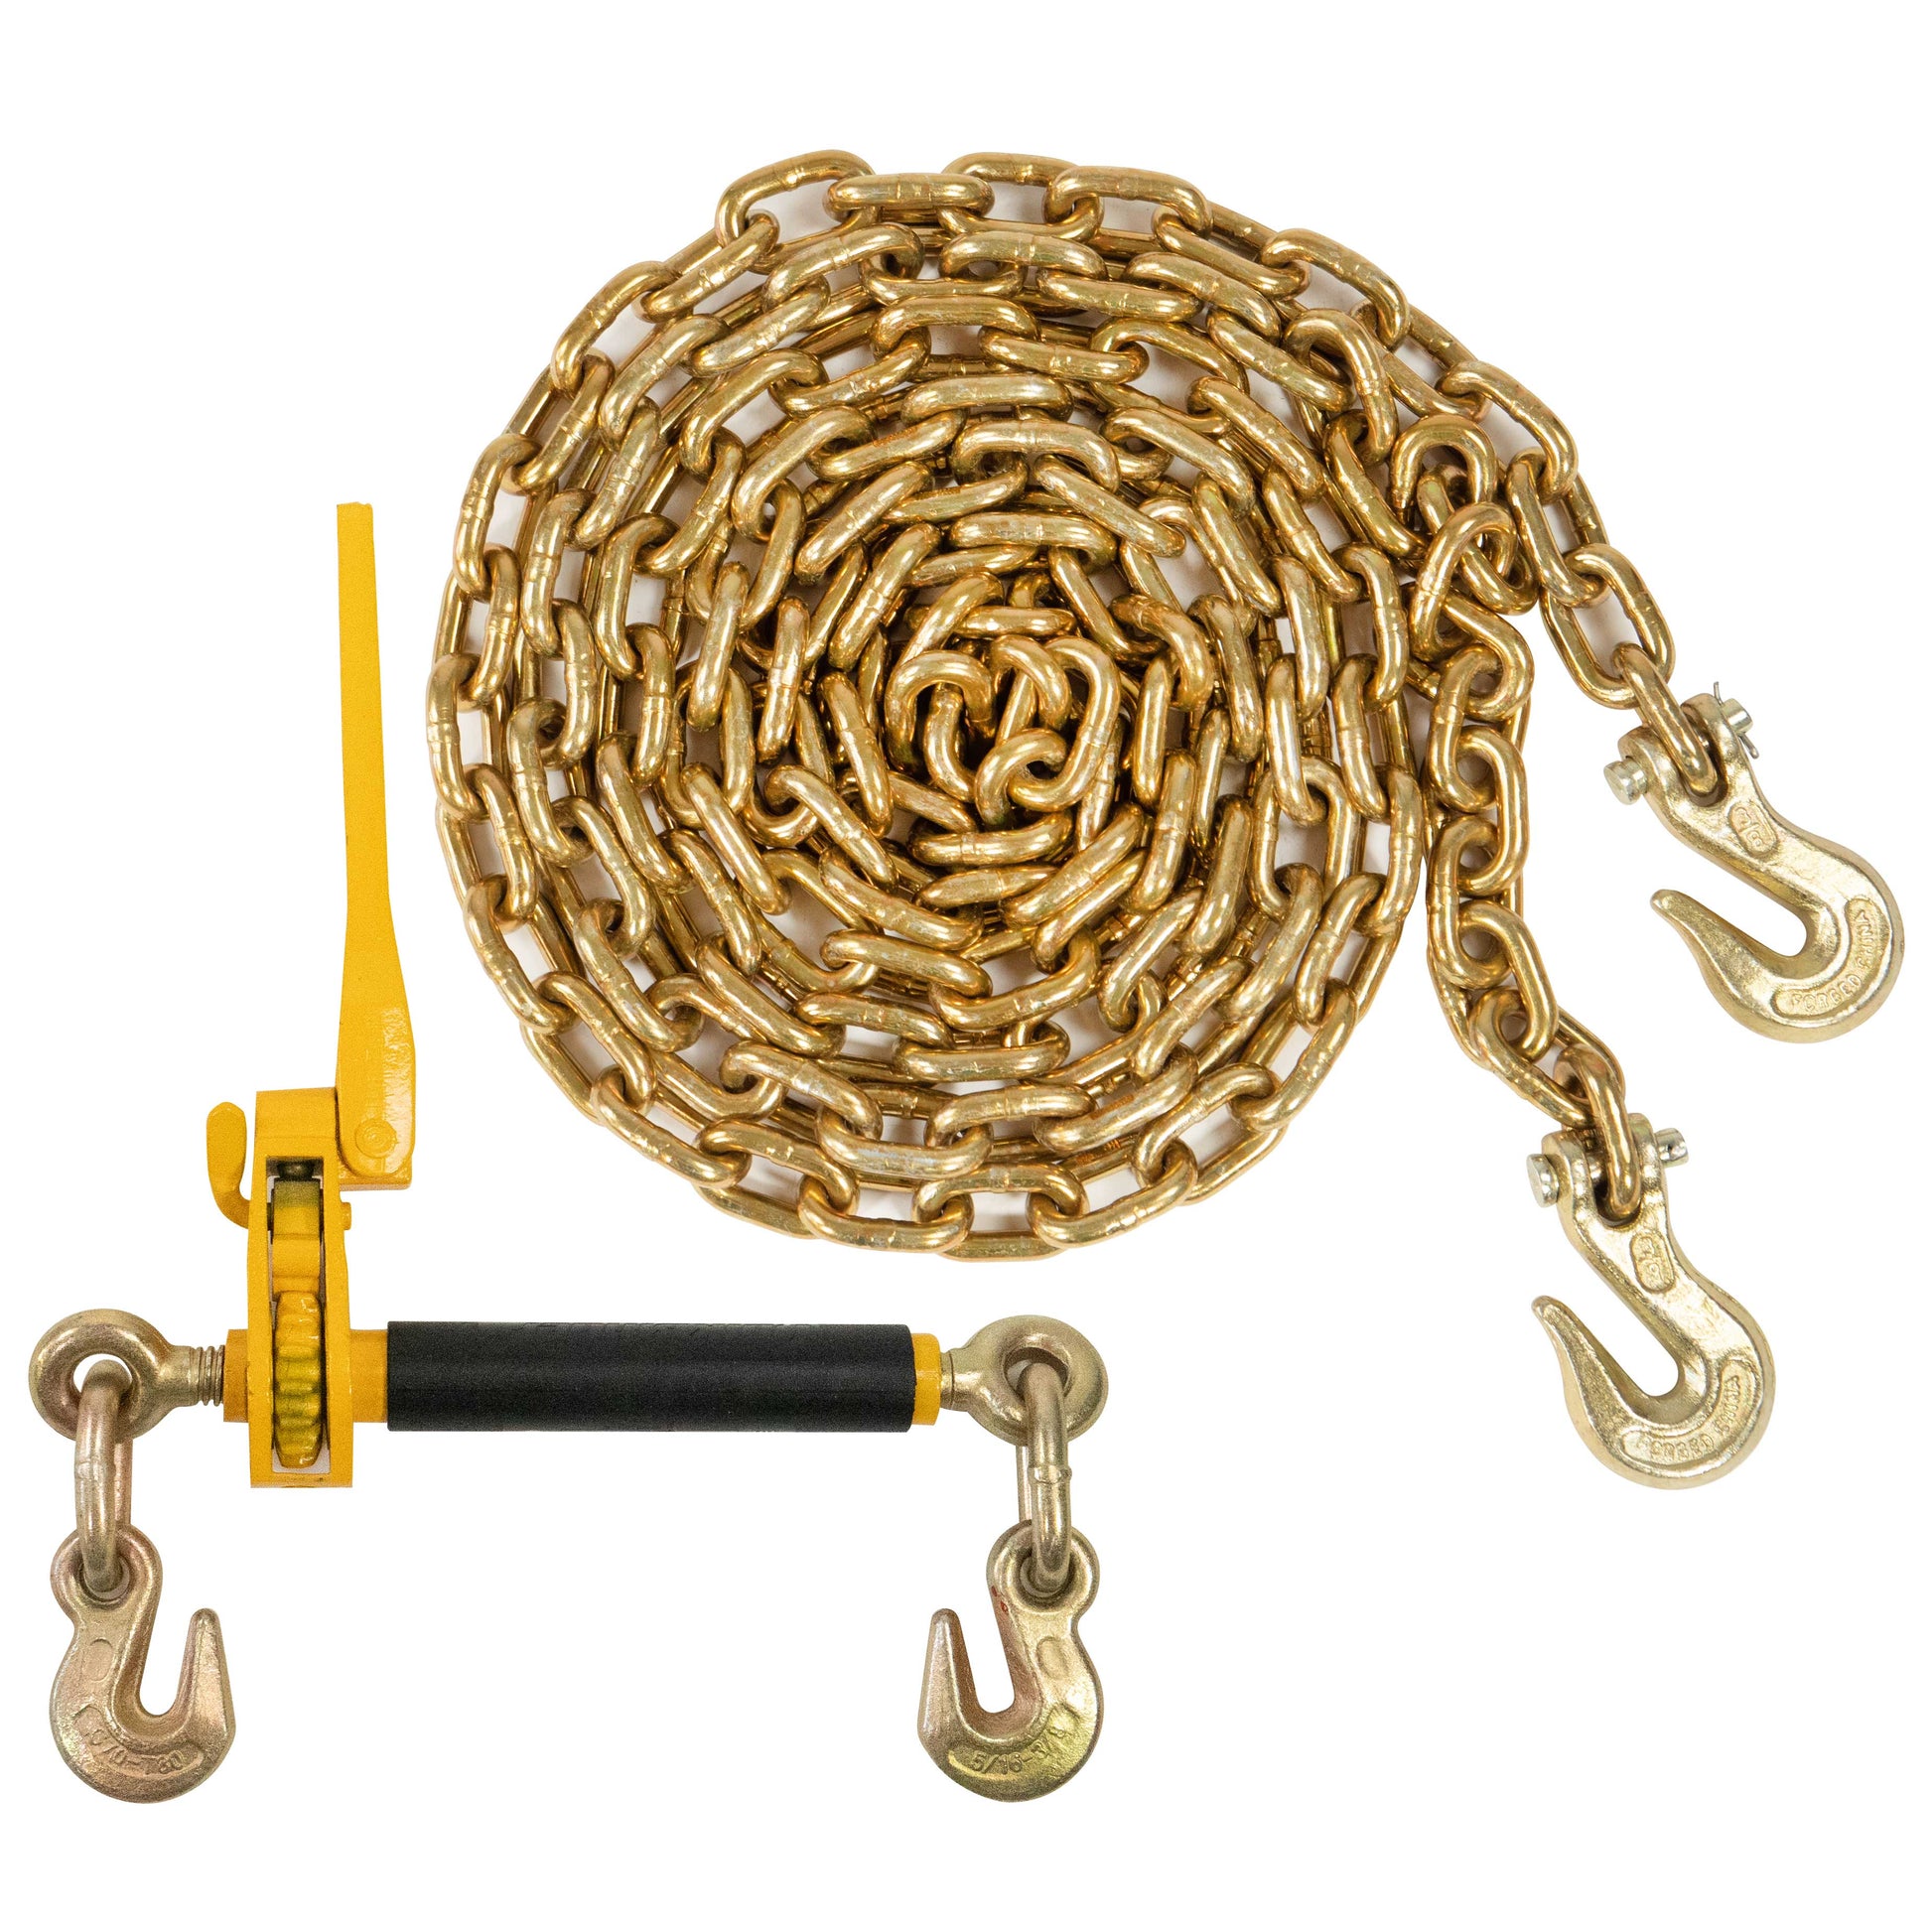 Grade 70 38 inch x 16 foot Peerless Chain and Binder Kit image 1 of 8